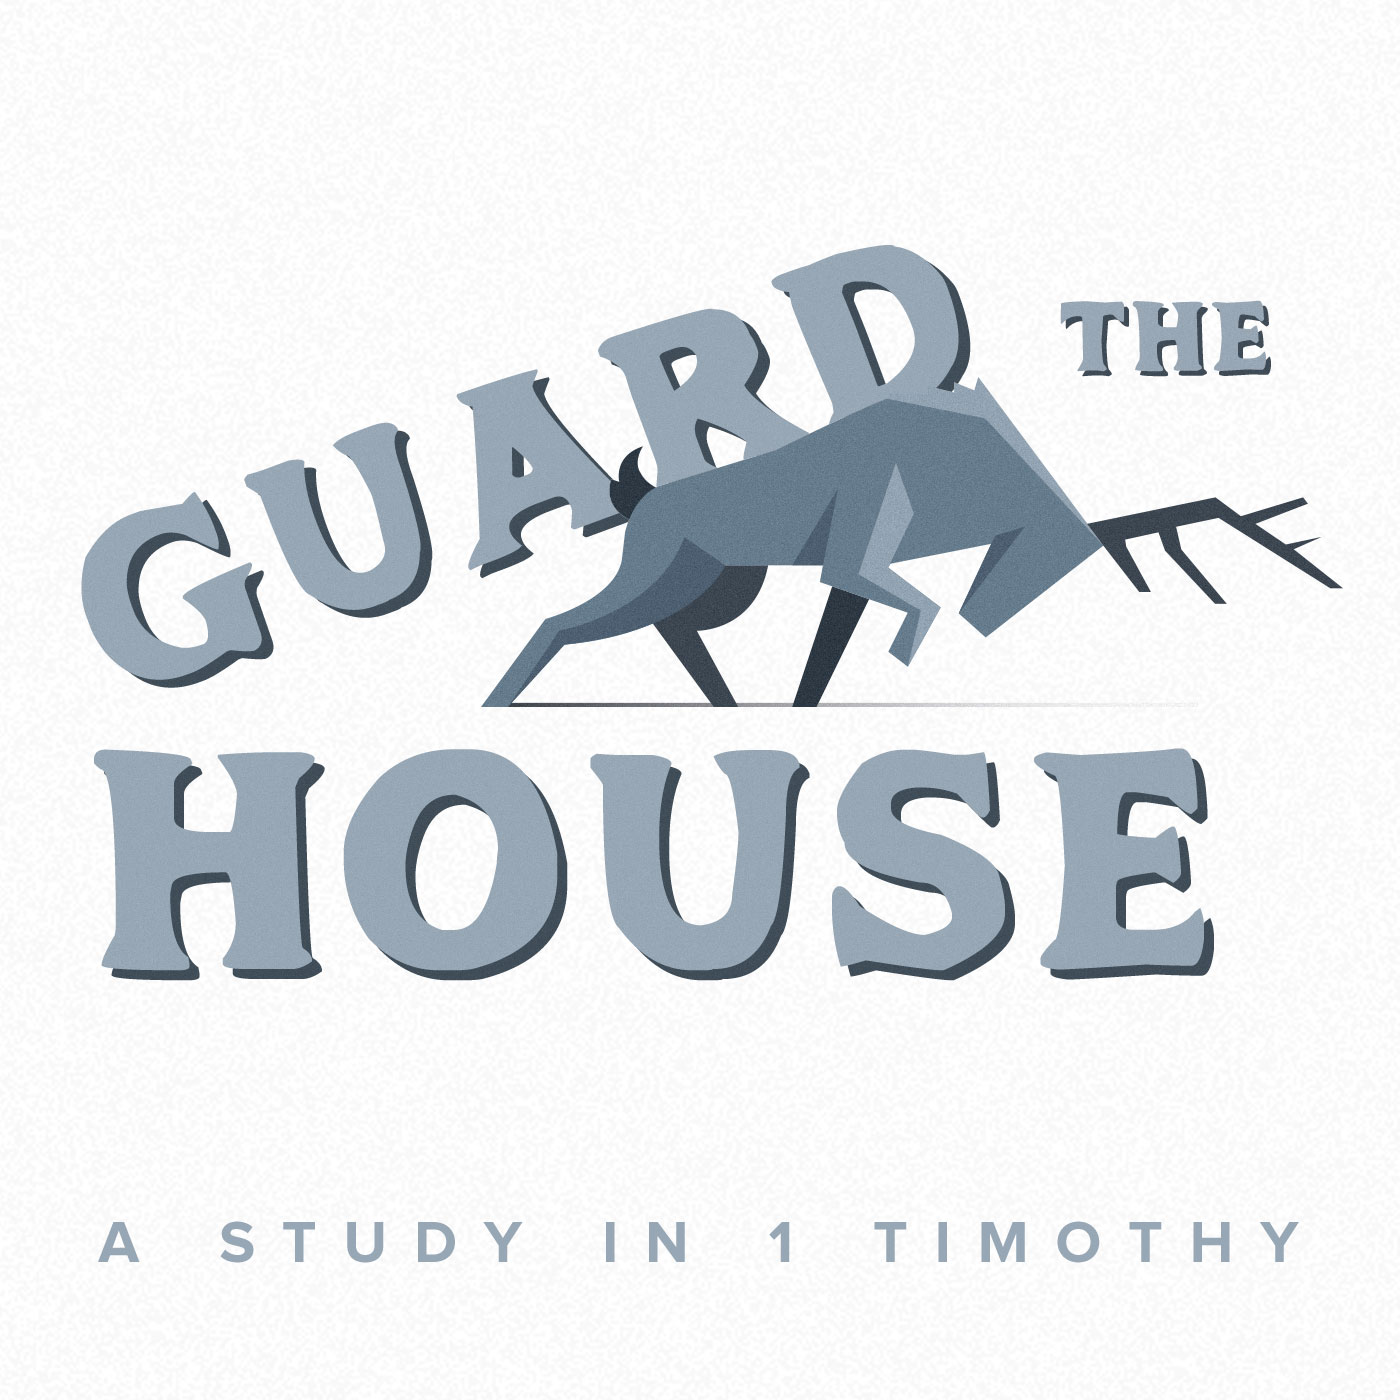 Guard the House